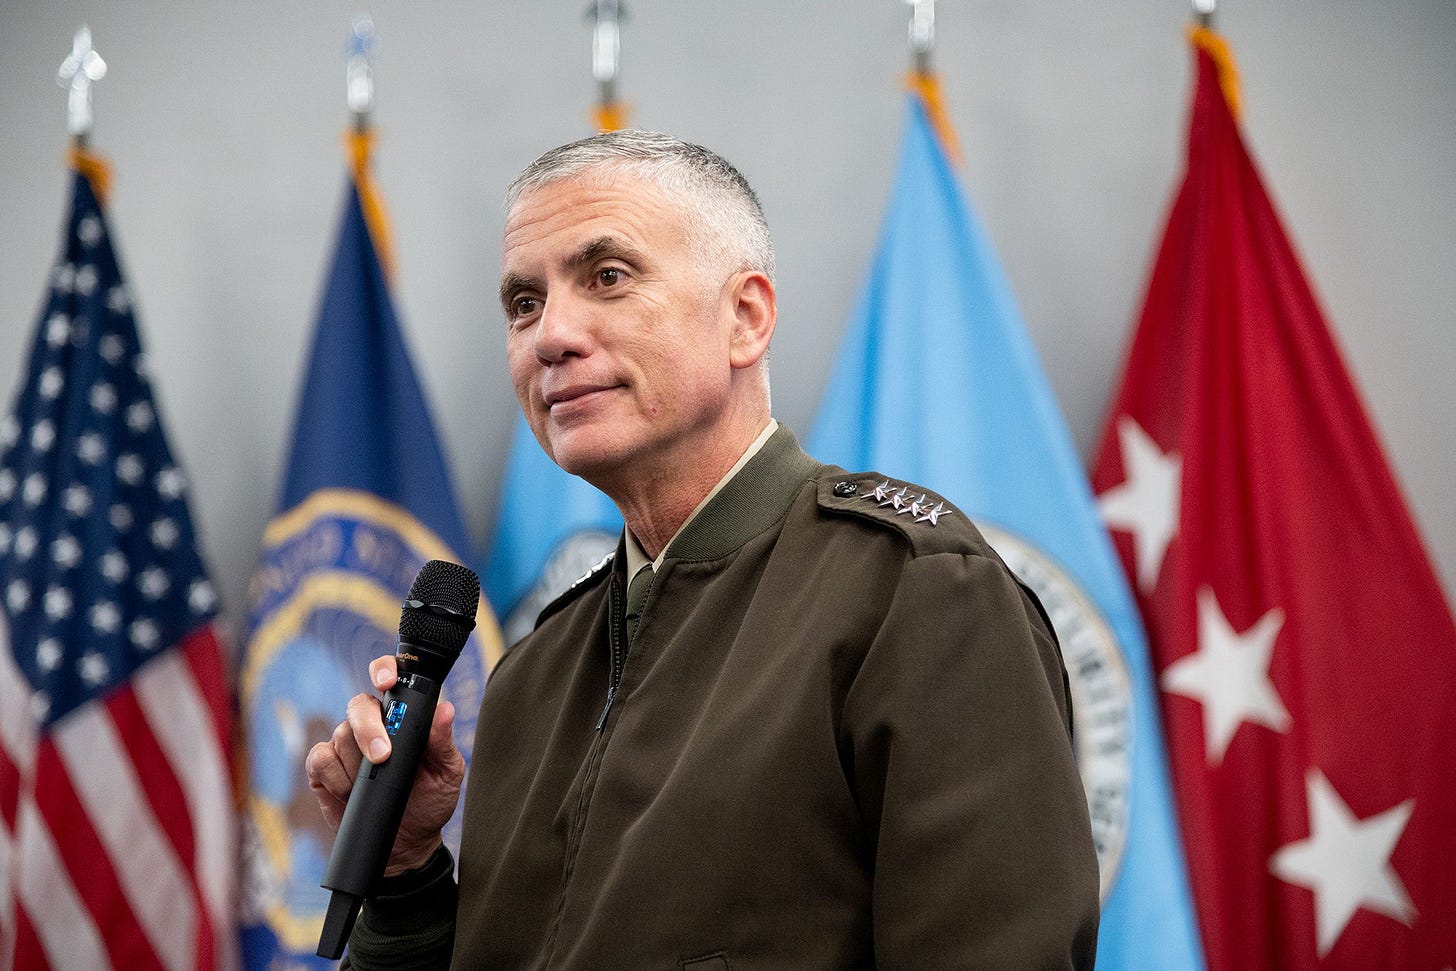 A photo of General Paul Nakasone with a microphone in hand.